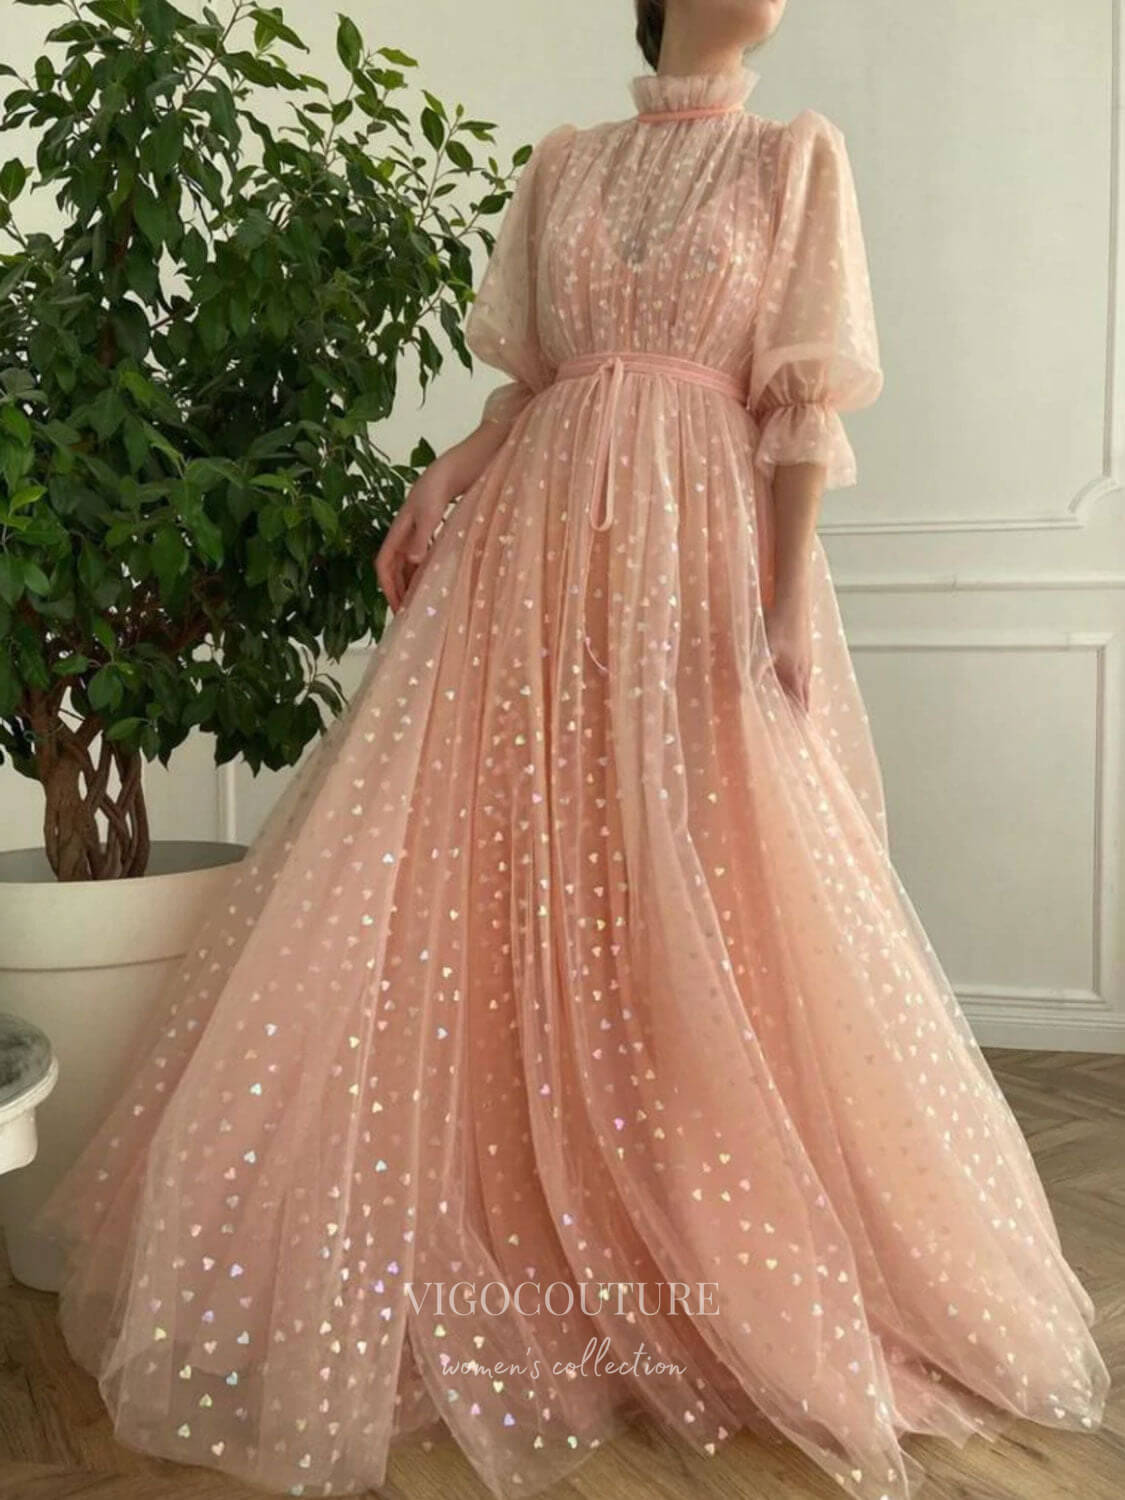 vigocouture-Blush Pink Starry Tulle Prom Dresses High Neck Elbow Sleeve Evening Dress 21777-Prom Dresses-vigocouture-Blush-US2-